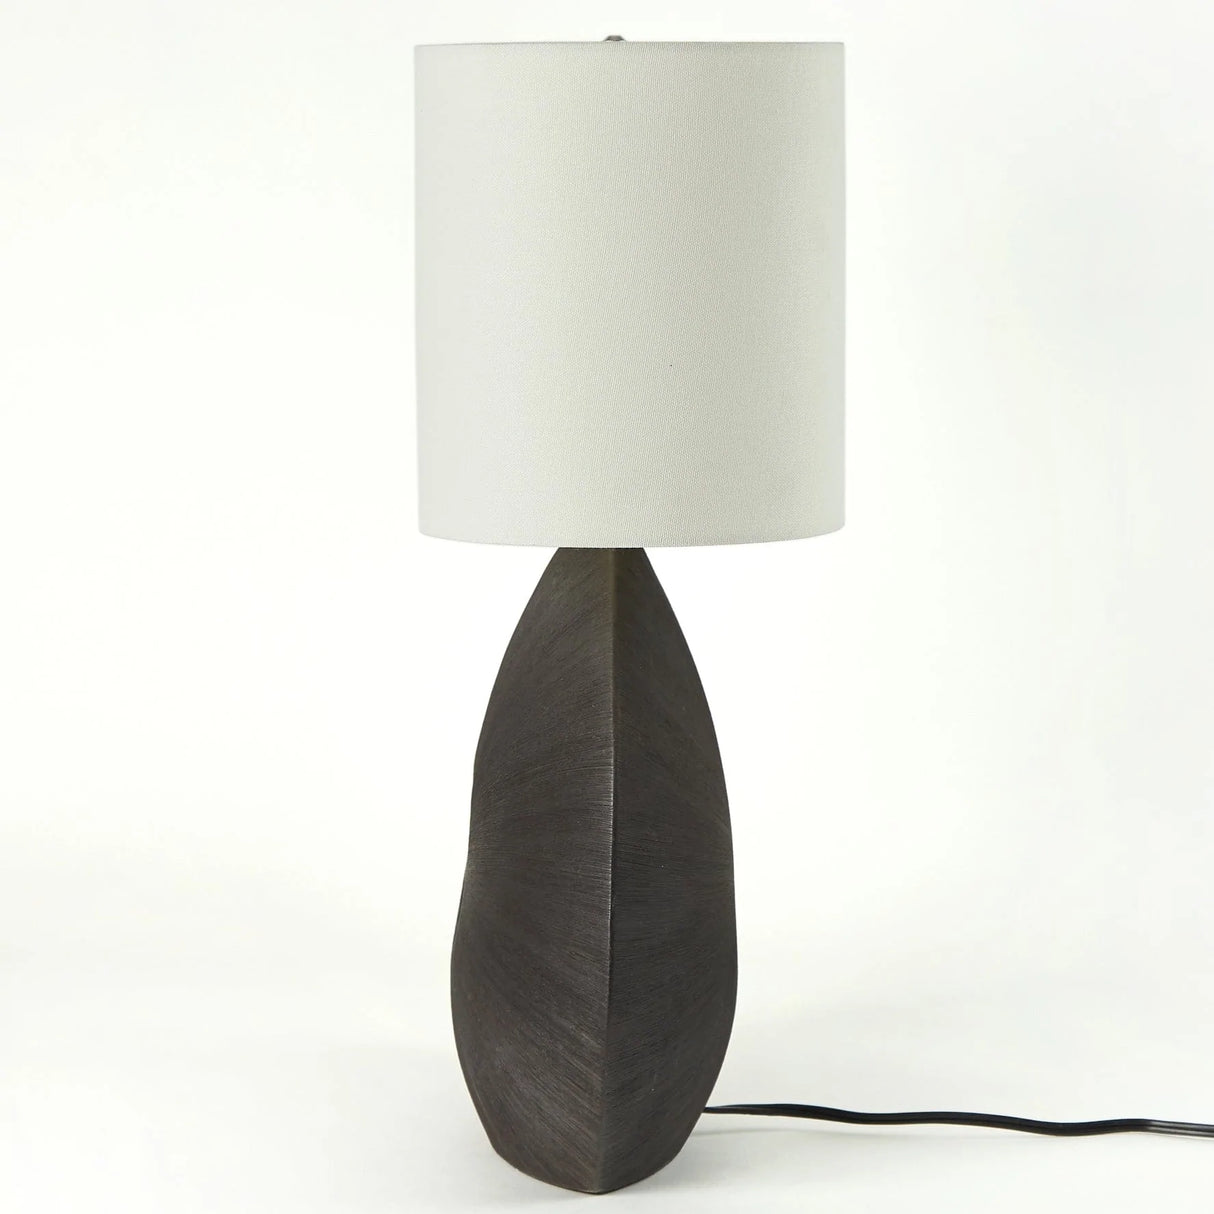 Four Hands Busaba Table Lamp Lighting four-hands-229615-001 801542718350